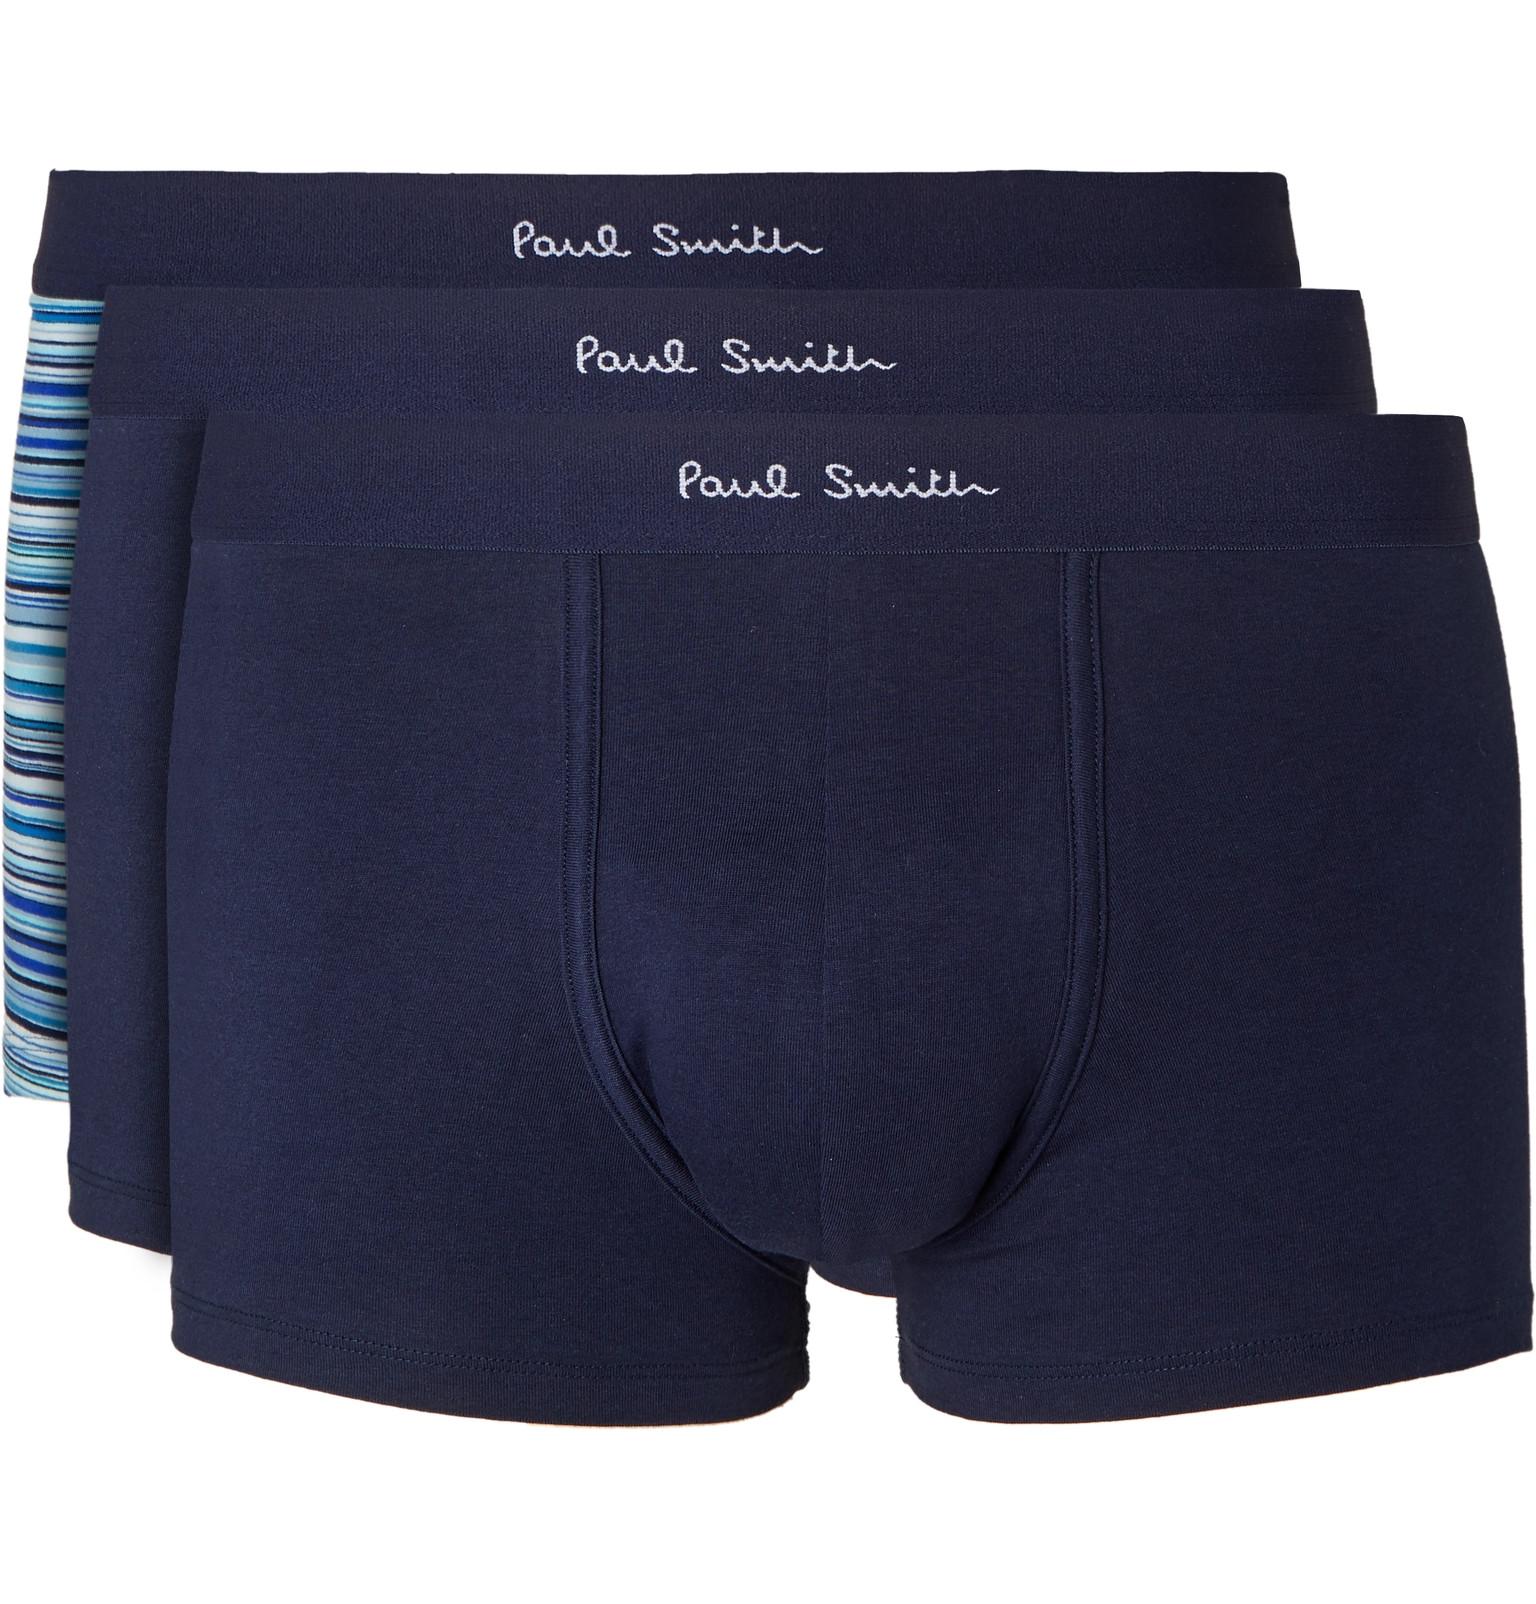 Paul Smith Three-pack Stretch-cotton Boxer Briefs in Blue for Men - Lyst